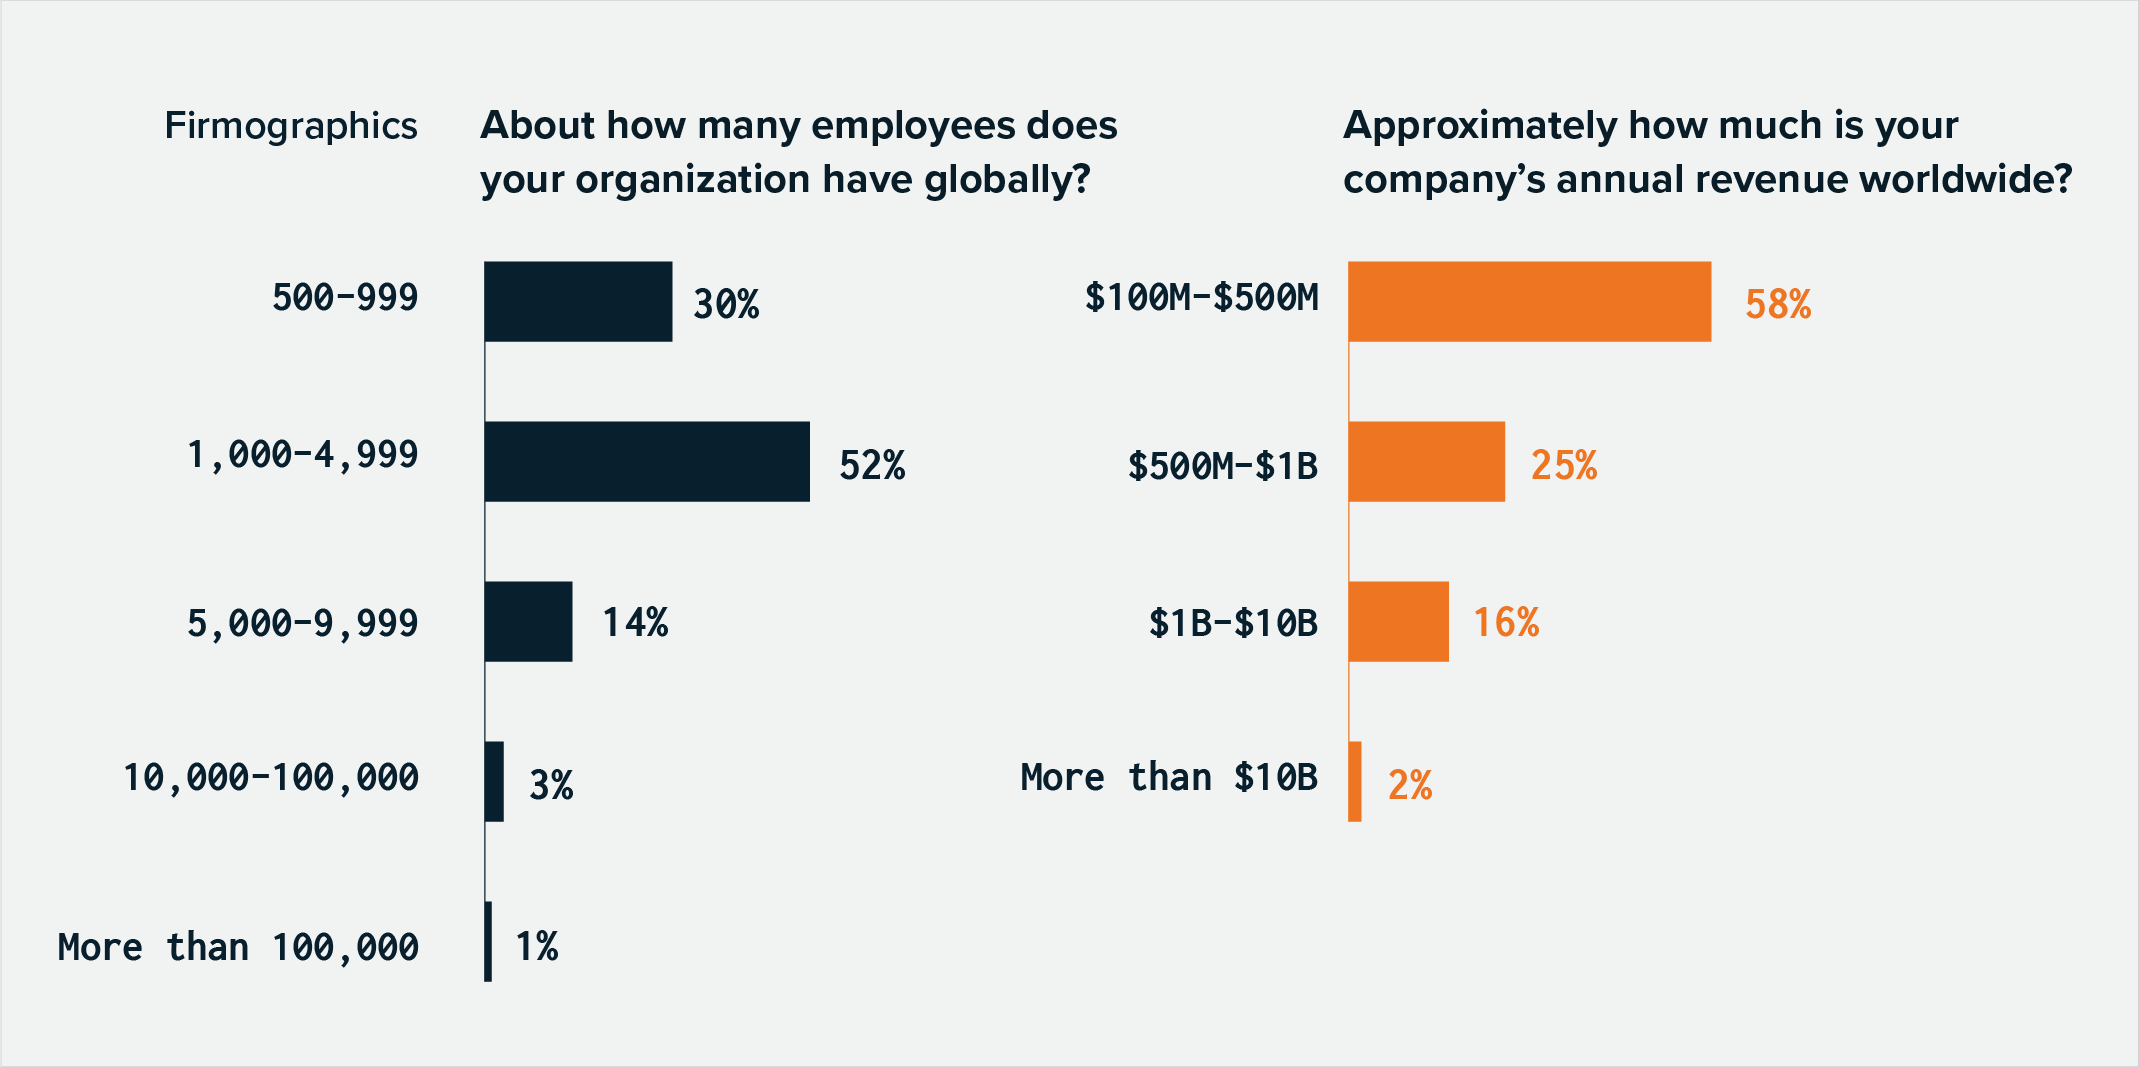 The number of employees in your organization around the world